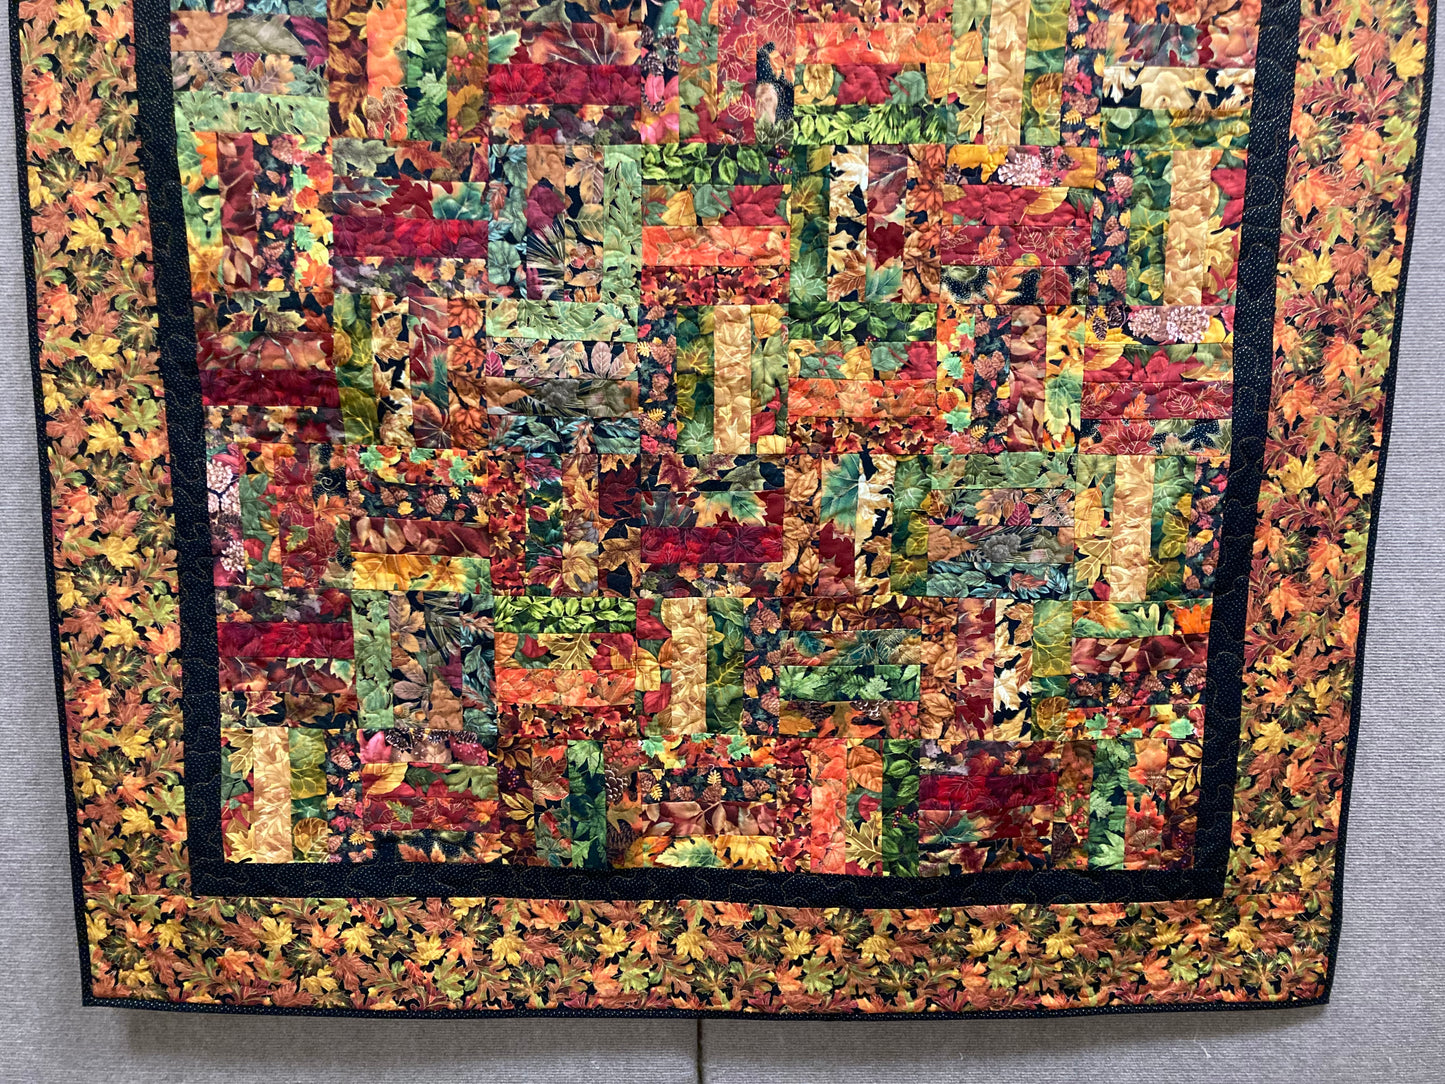 Fall Autumn Leaves Lap Quilt Sofa Throw, Vibrant Gold, Red, Green Leaves, 56x56", Couch Bed, Warm Cotton, Earth Tones Mountain Cabin Lodge